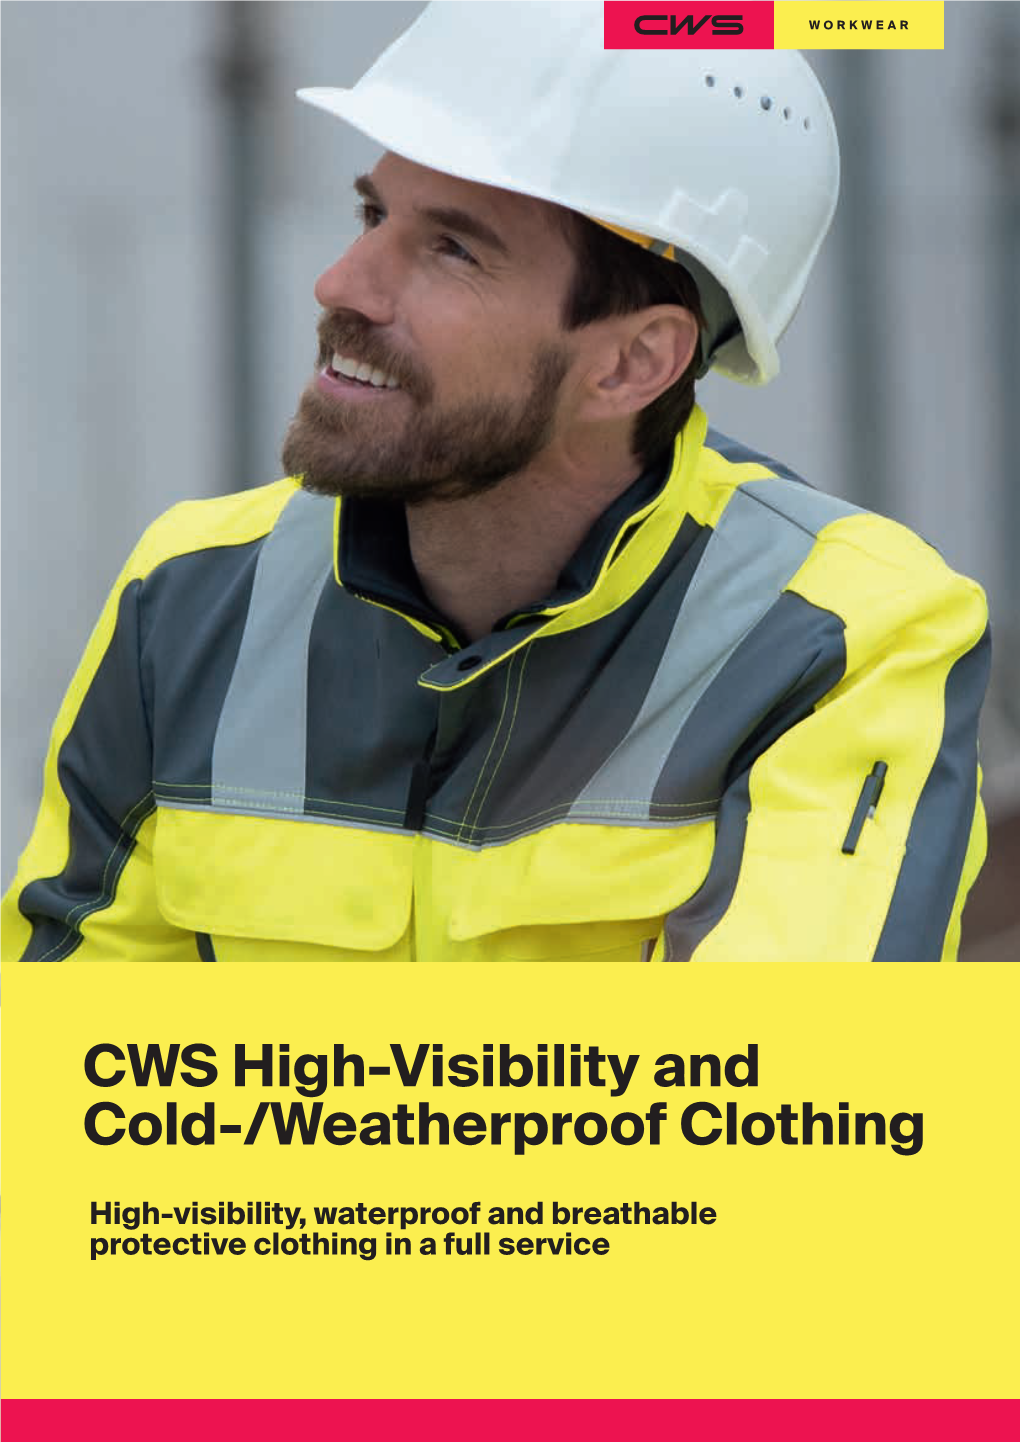 CWS High-Visibility and Cold-/Weatherproof Clothing